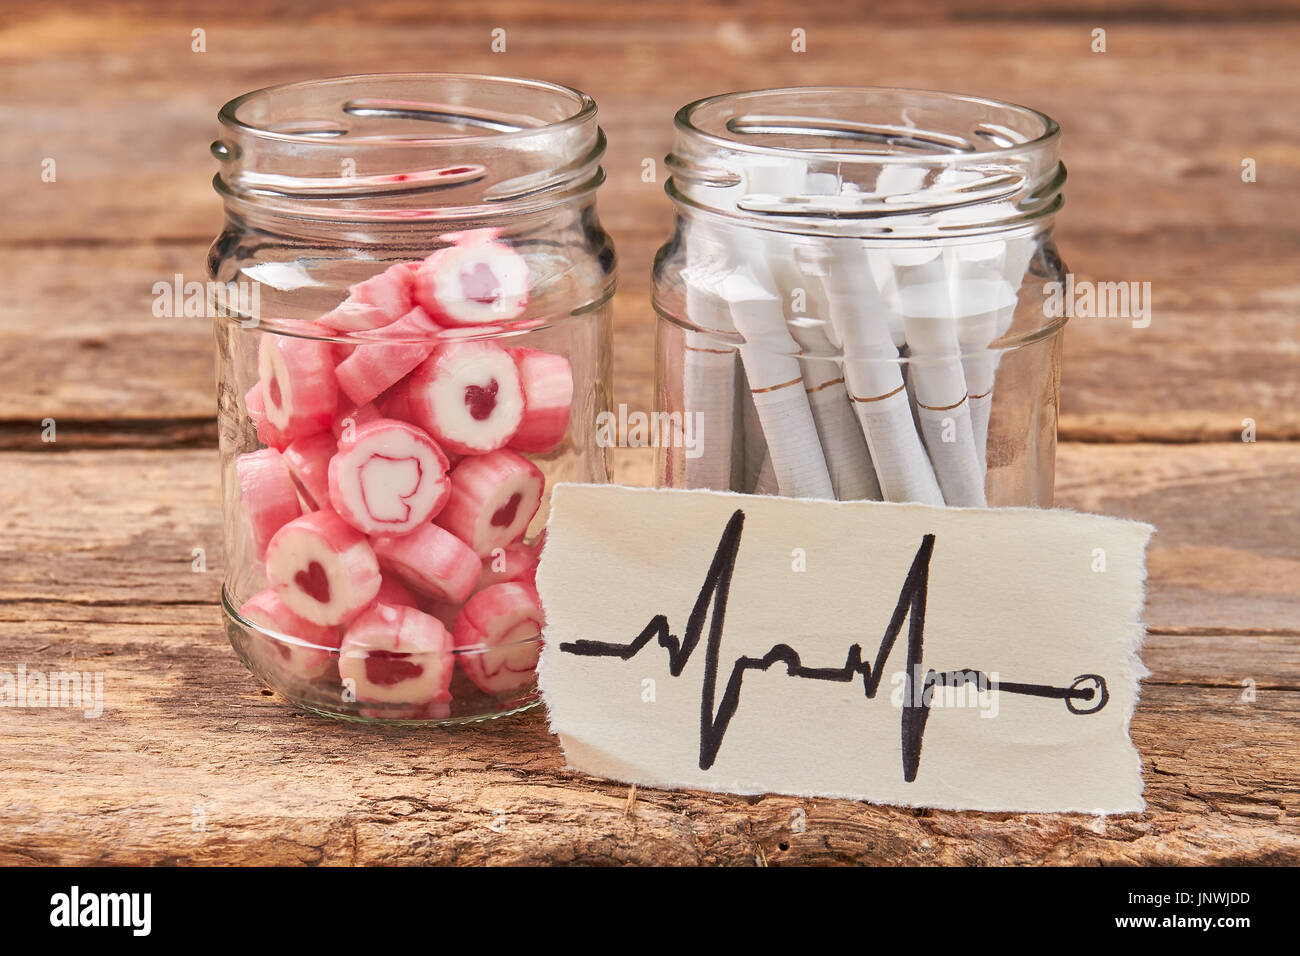 Image of heartbeat, sweets, cigarettes. Stock Photo